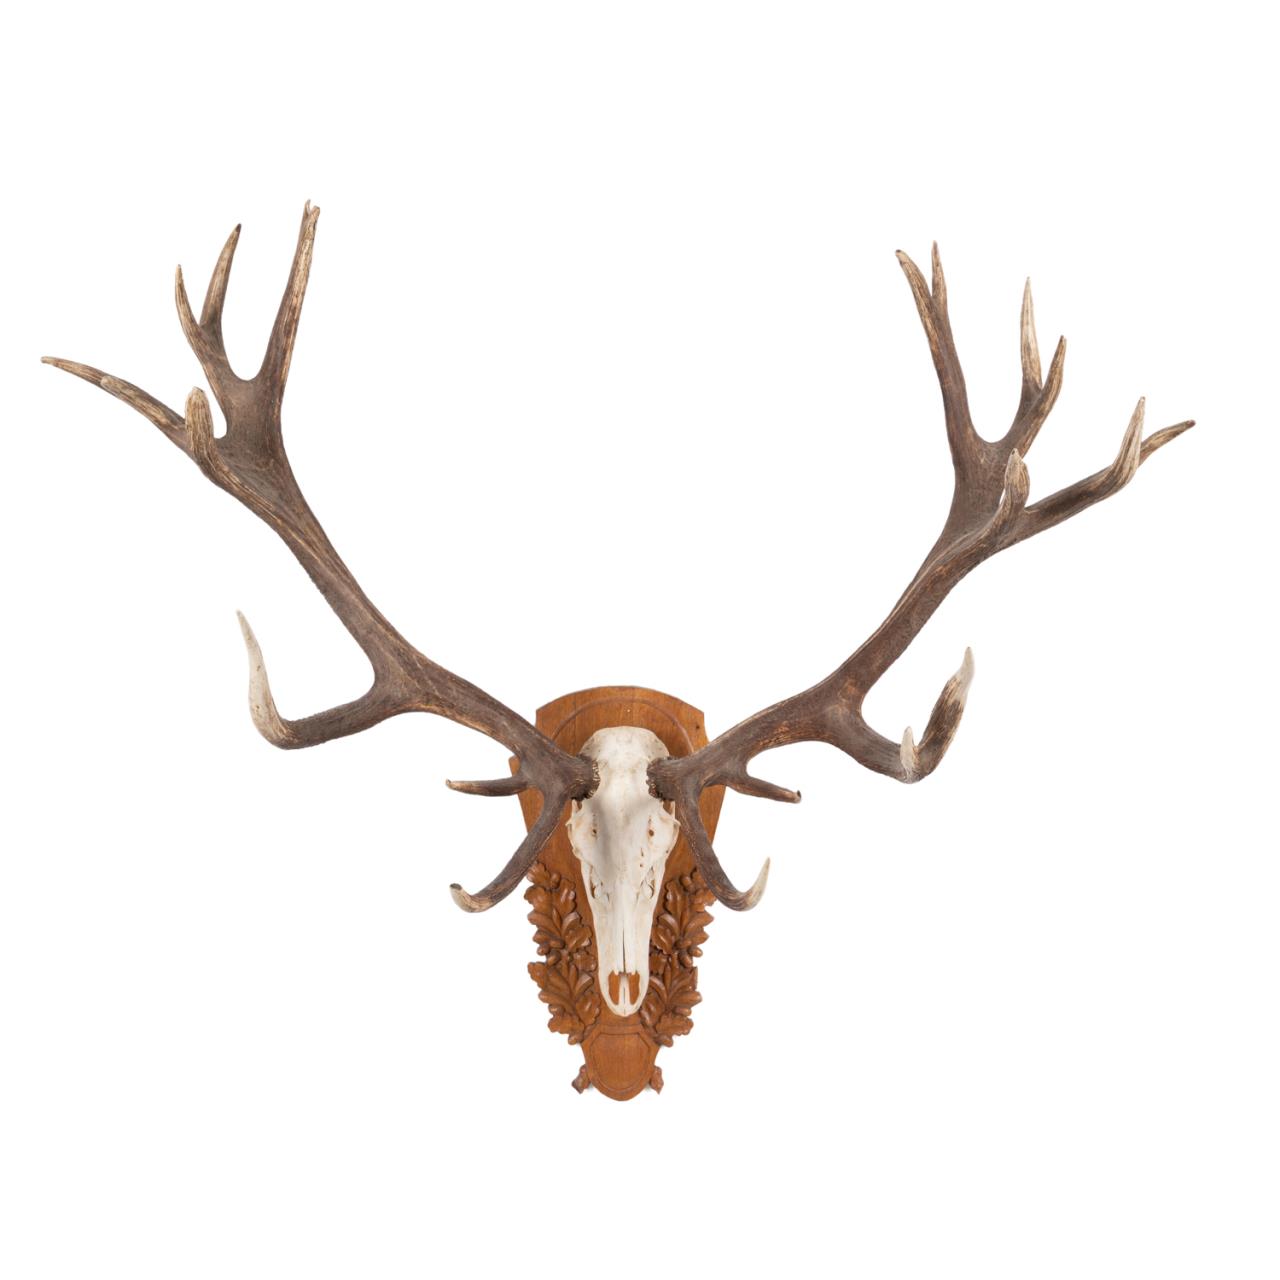 LARGE MOUNTED RED STAG ANTLERS 354d06